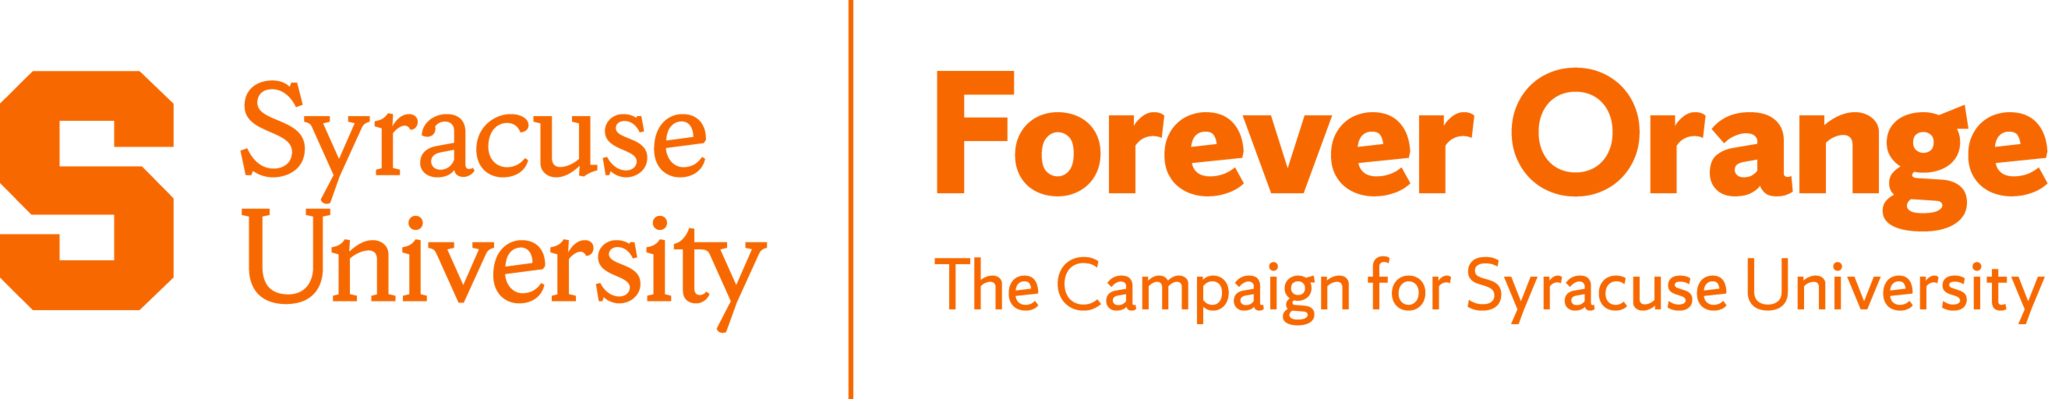 Forever Orange: The Campaign for Syracuse University